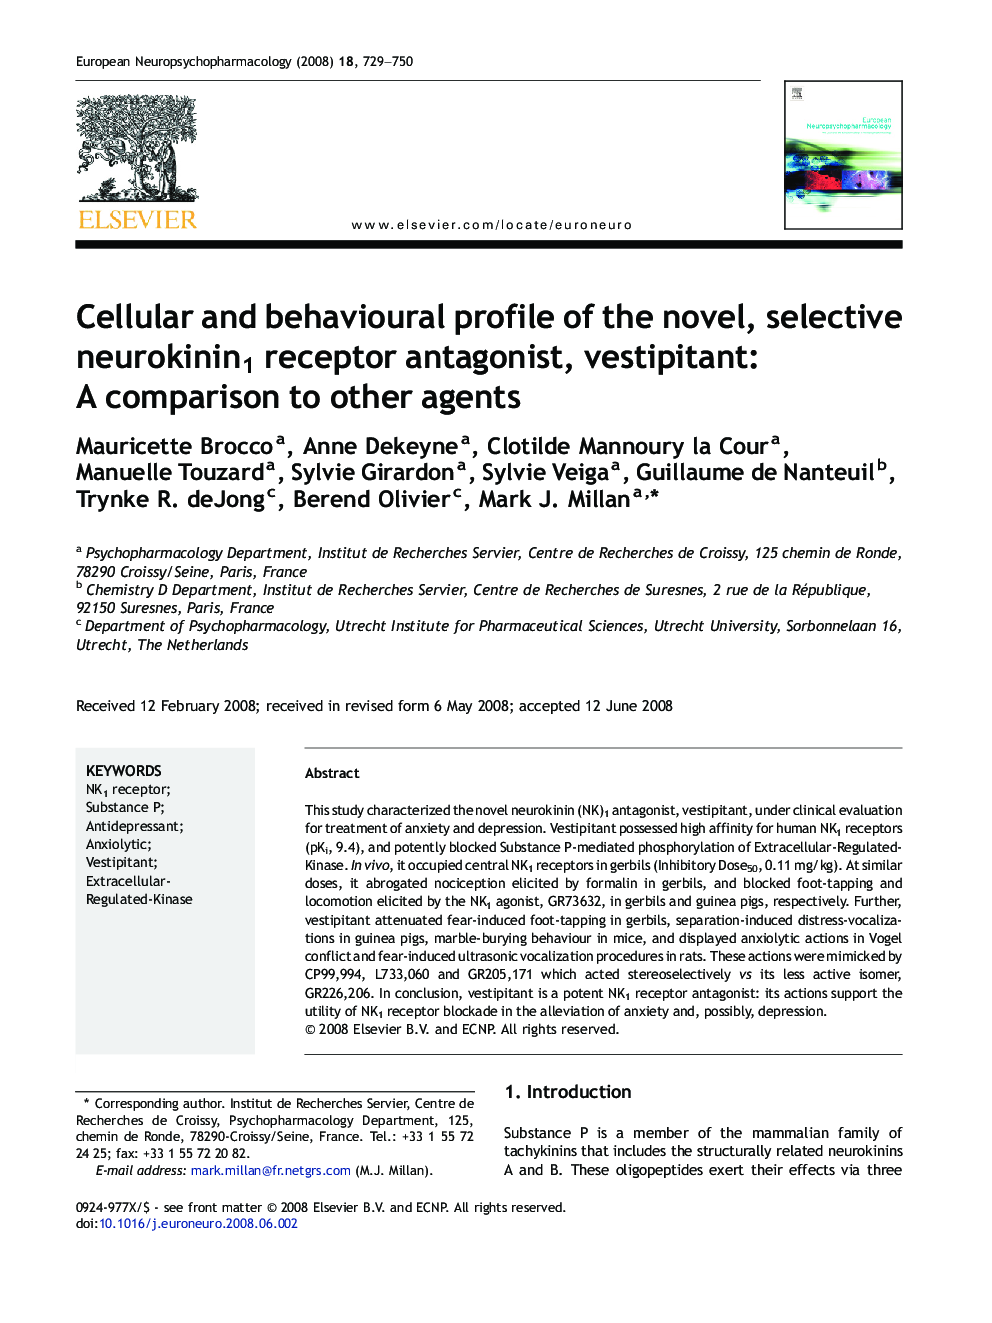 Cellular and behavioural profile of the novel, selective neurokinin1 receptor antagonist, vestipitant: A comparison to other agents